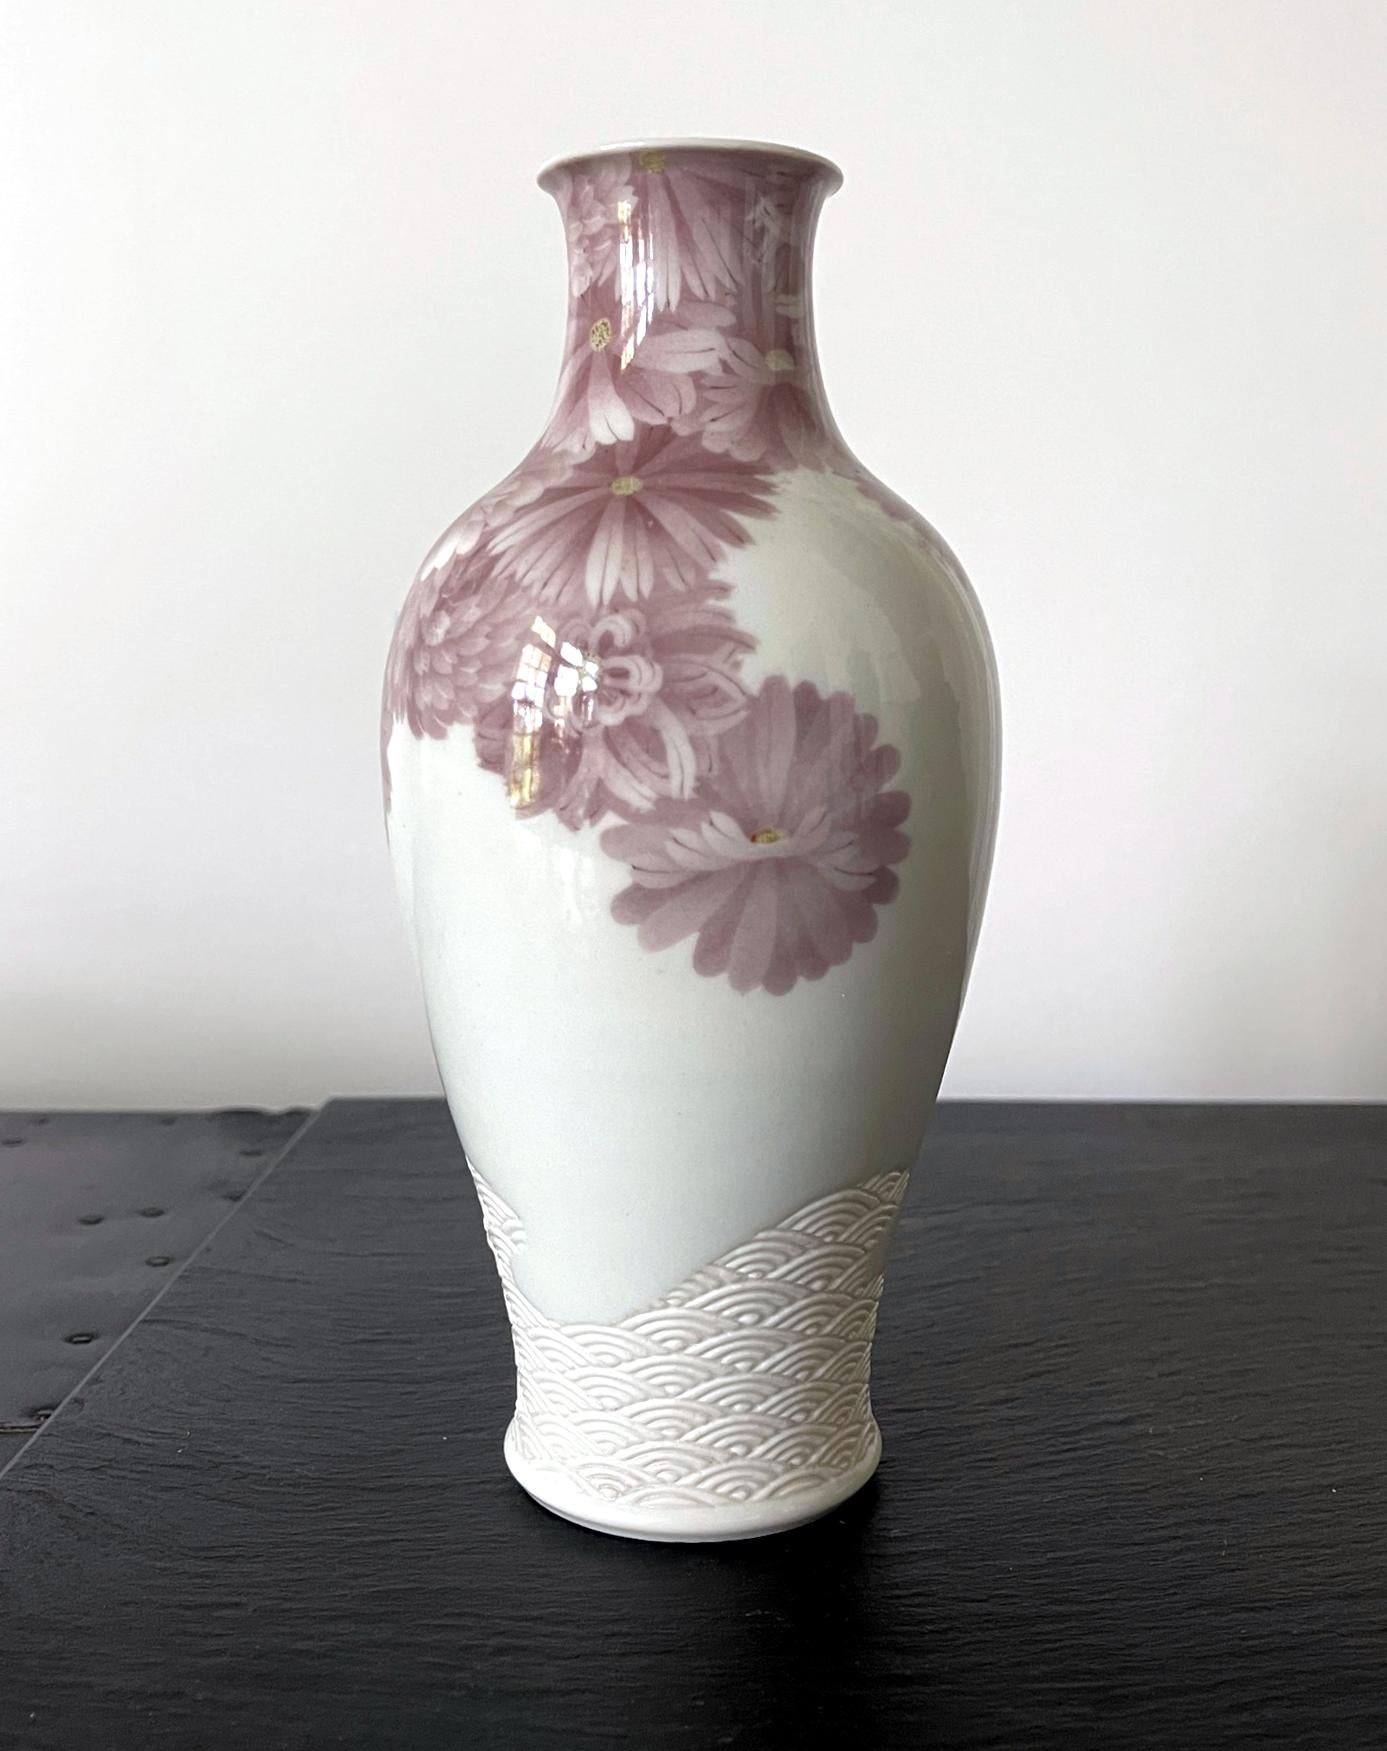 A delicate and rare Japanese ceramic vase by the important Meiji imperial potter Makuzu Kozan (1842-1916) circa 1887-1910. Dated to his underglaze phase post 1887 after he successfully mastered the new colors available from the west and used them to